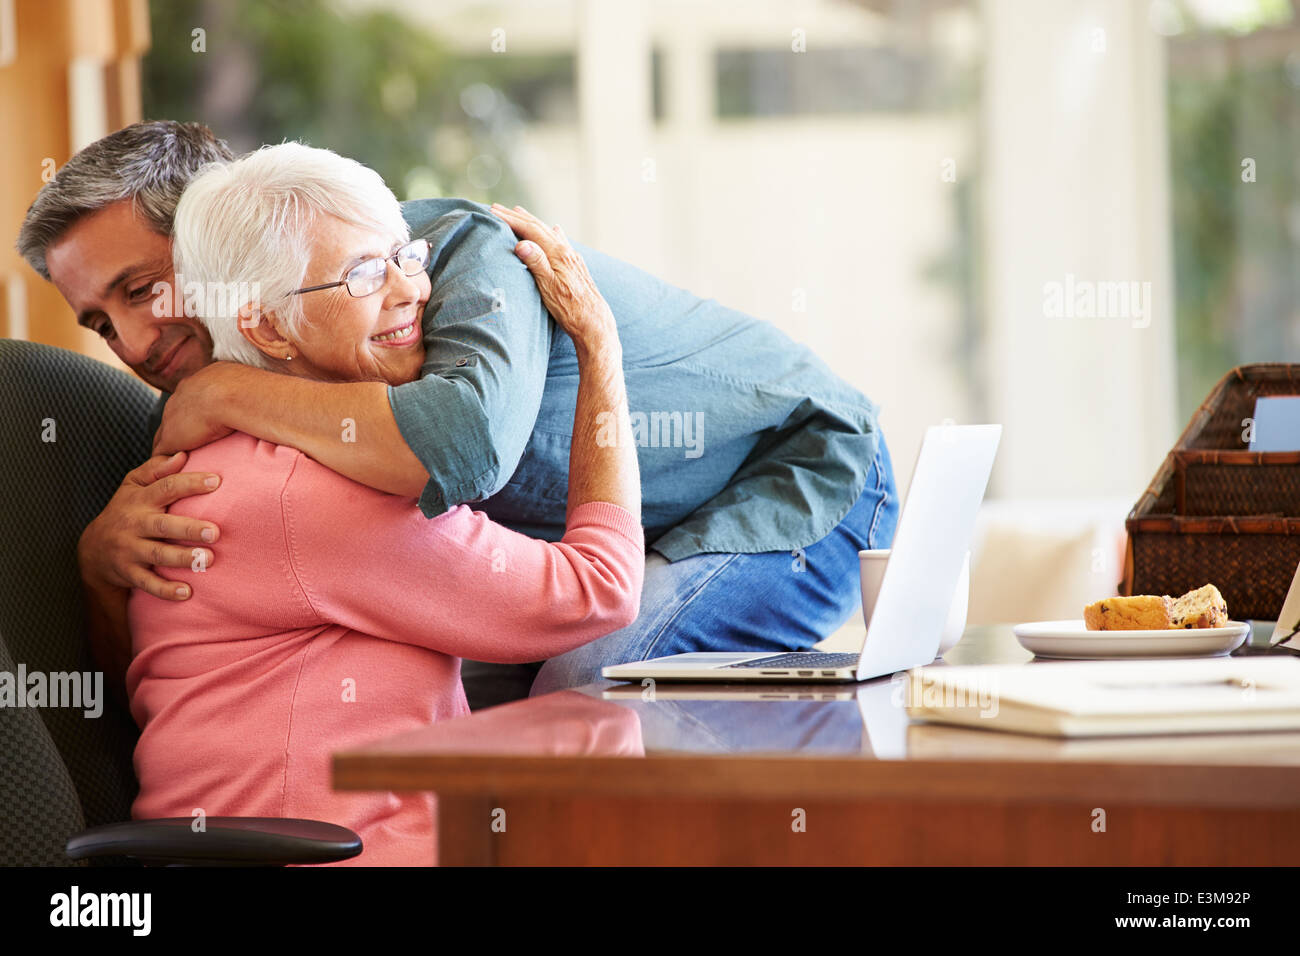 Senior Mother Being Comforted By Adult Son Stock Photo